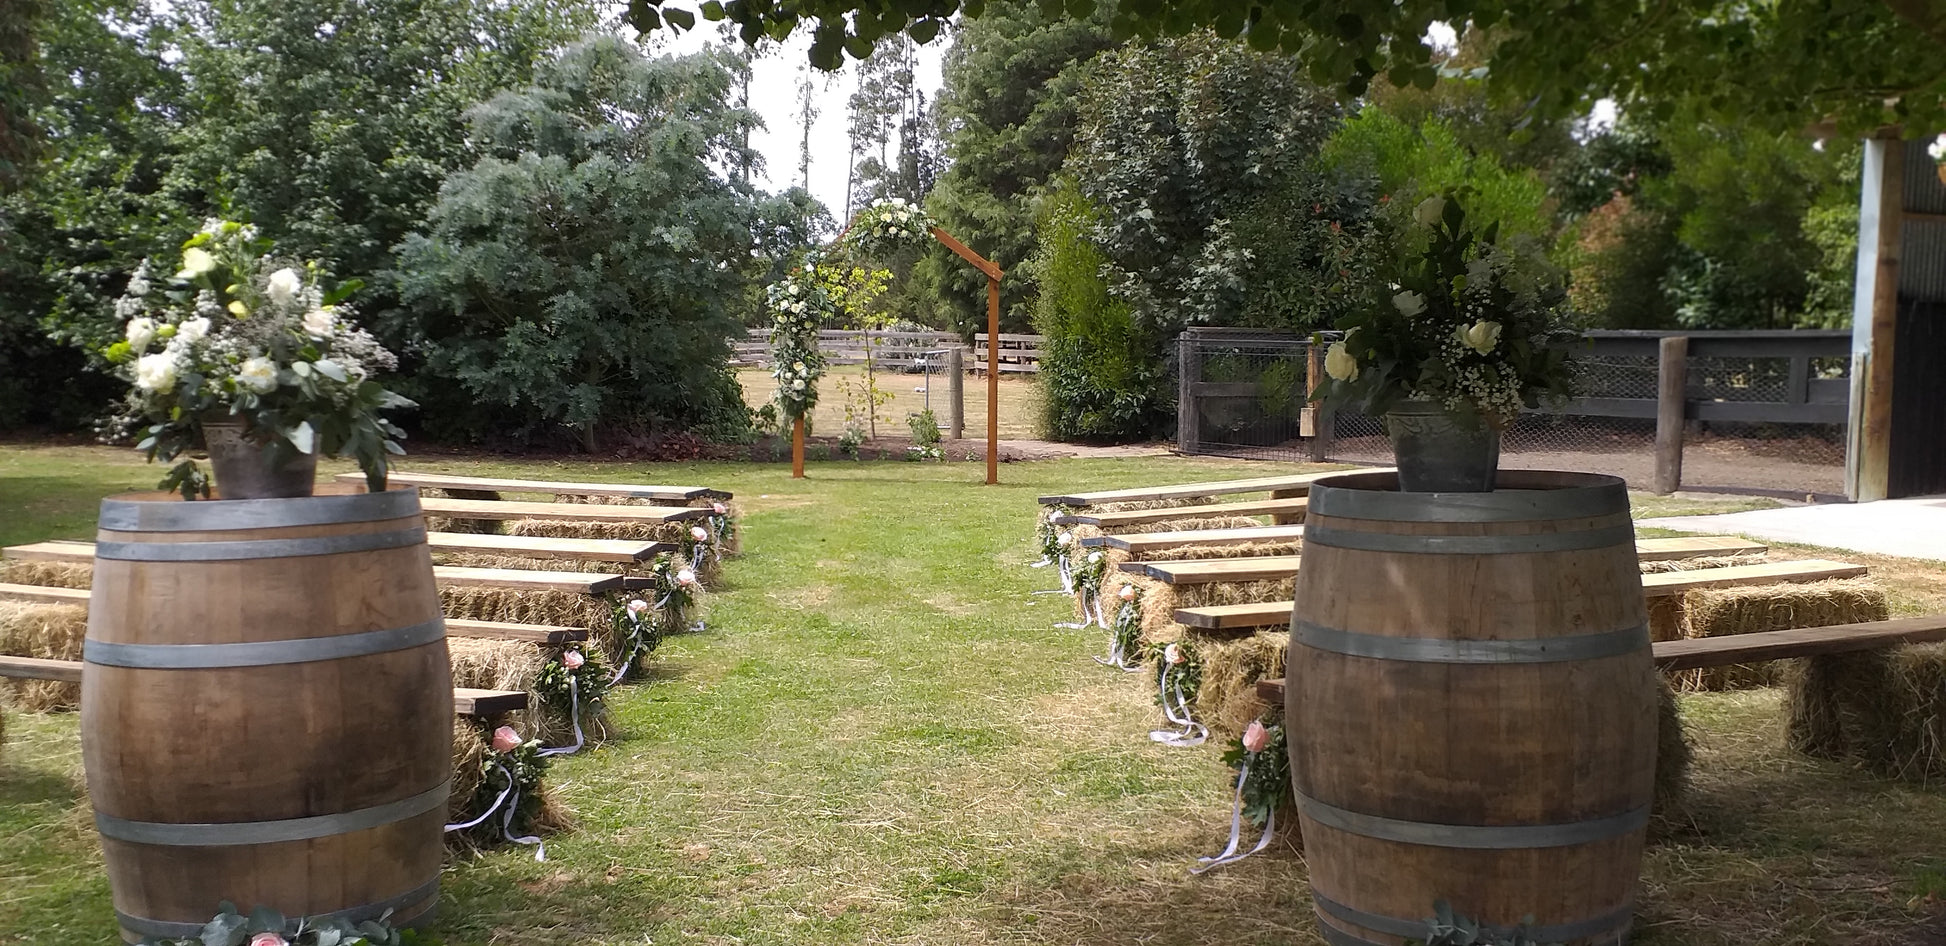 Garden setting with flower arrangements on barrels and an archway with decorations